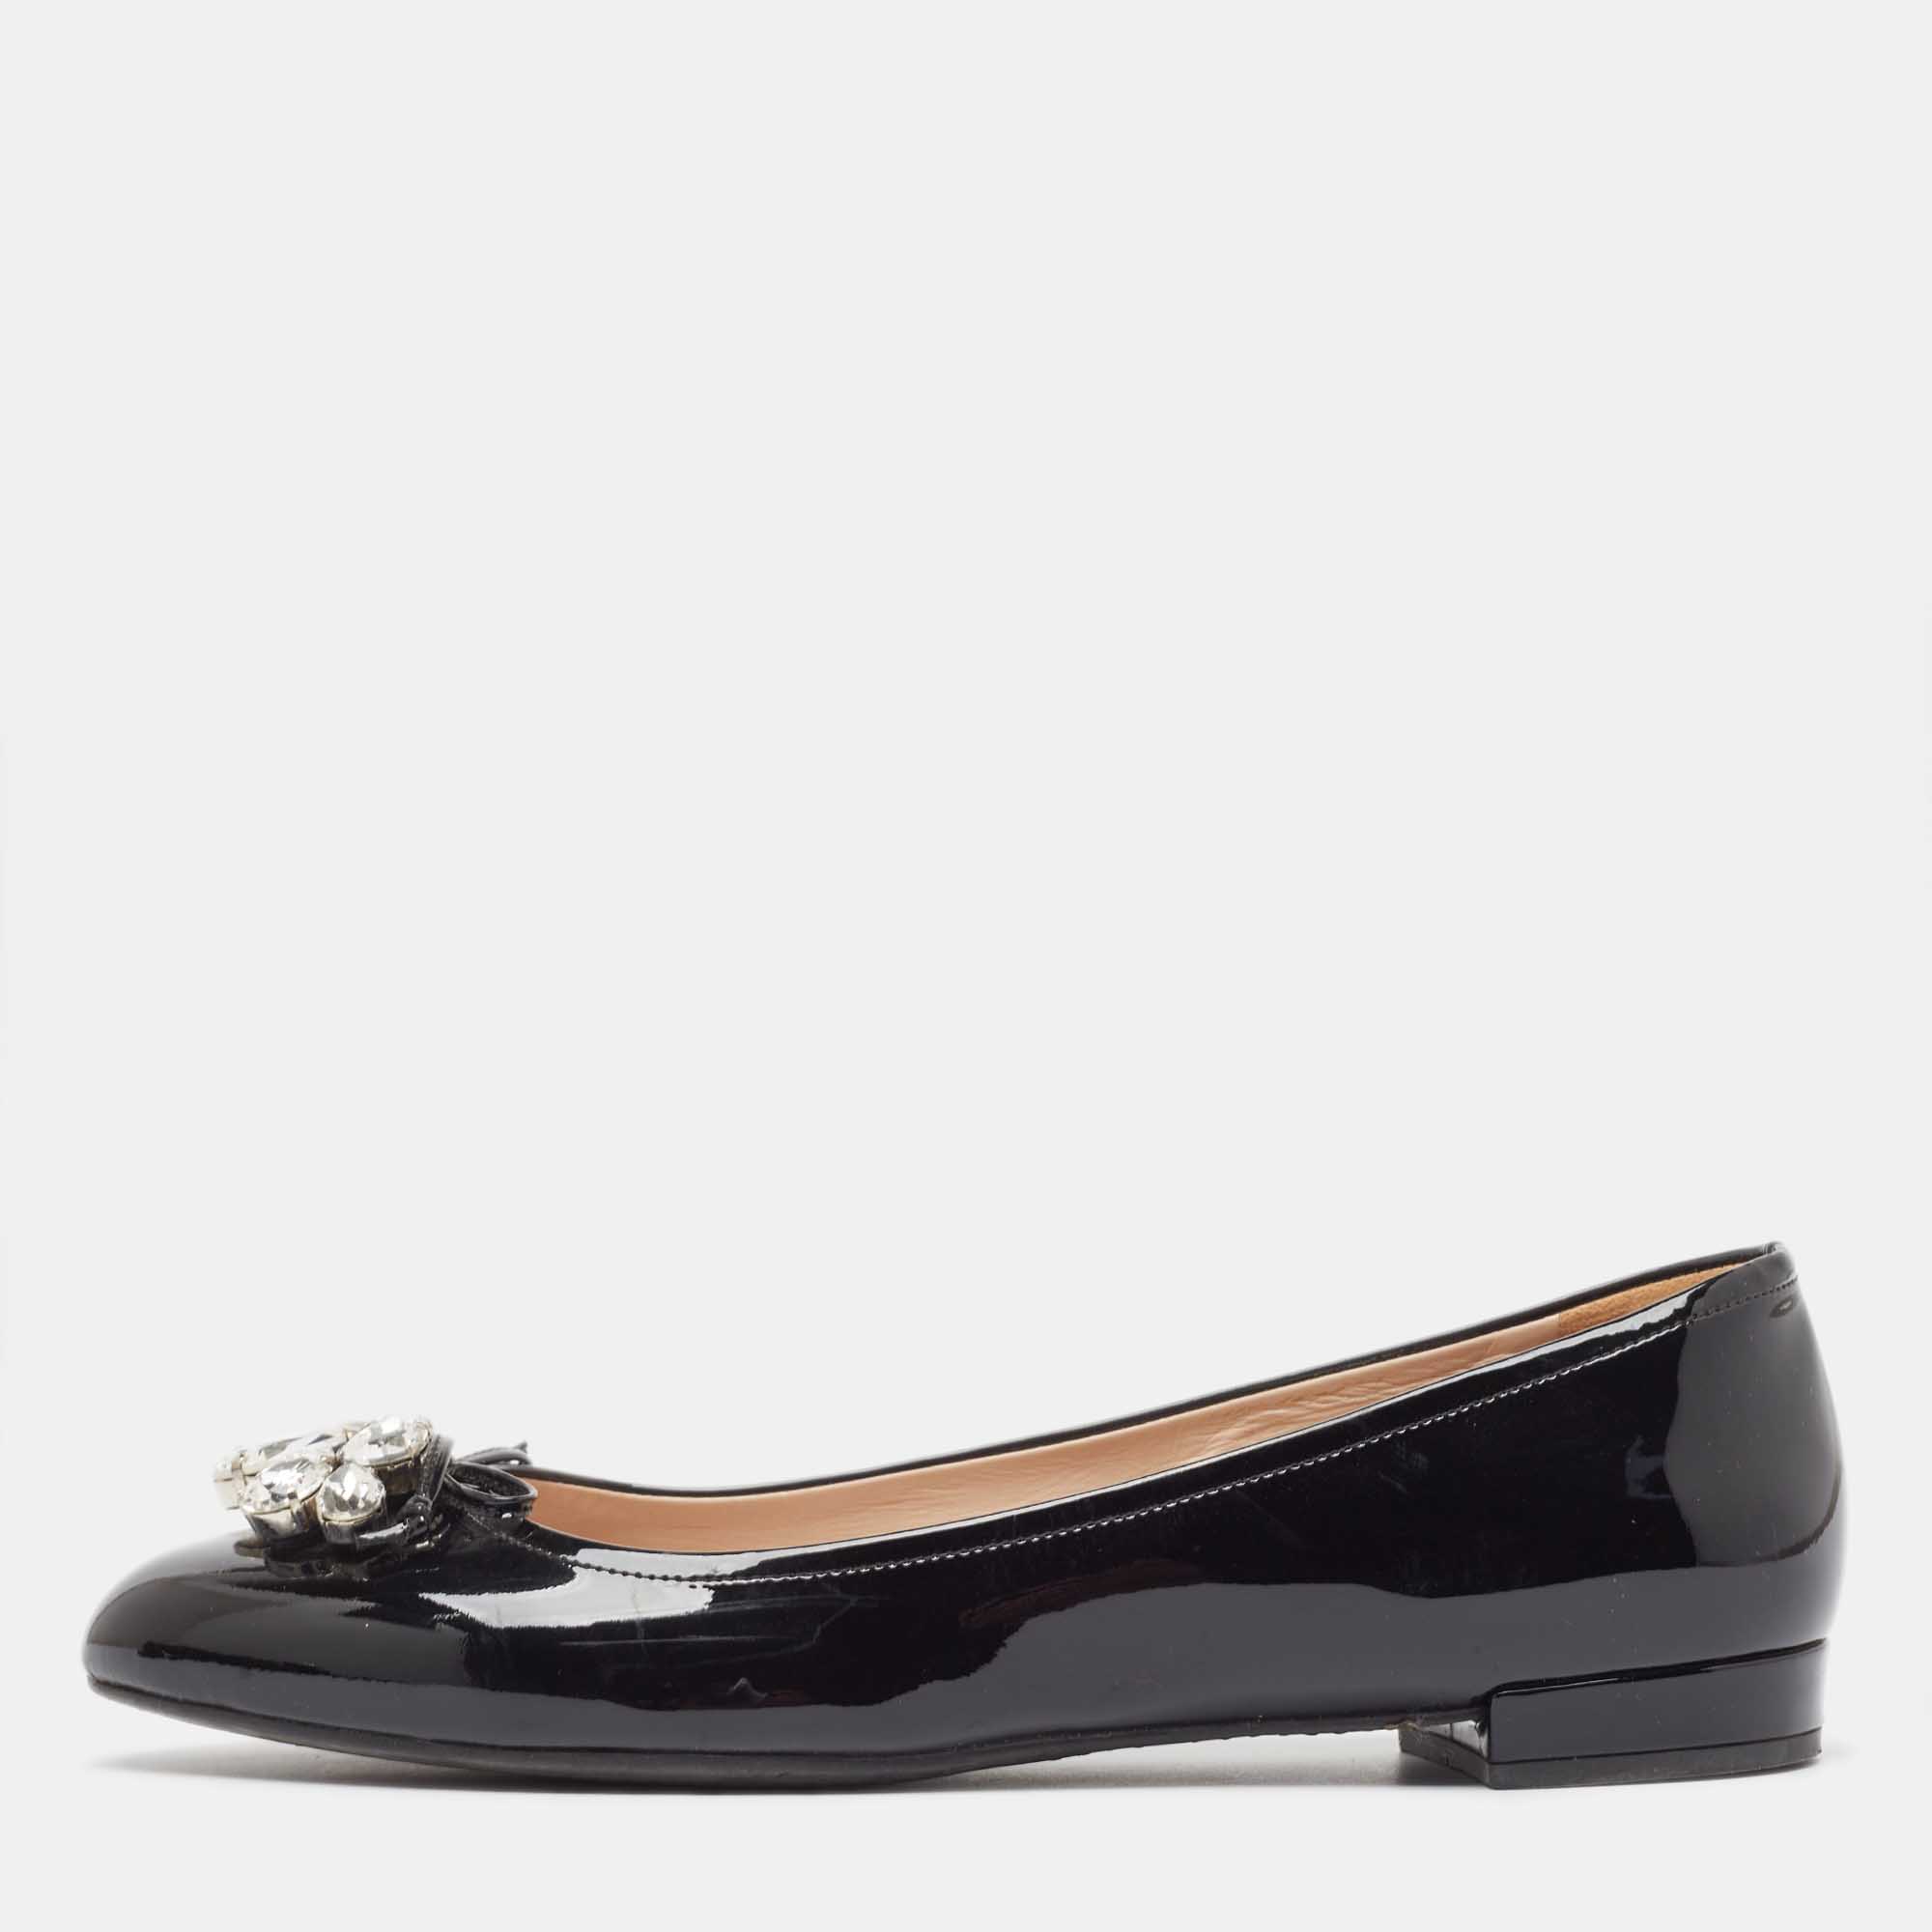 Pre-owned Miu Miu Black Patent Leather Crystal Embellished Ballet Flats Size 39